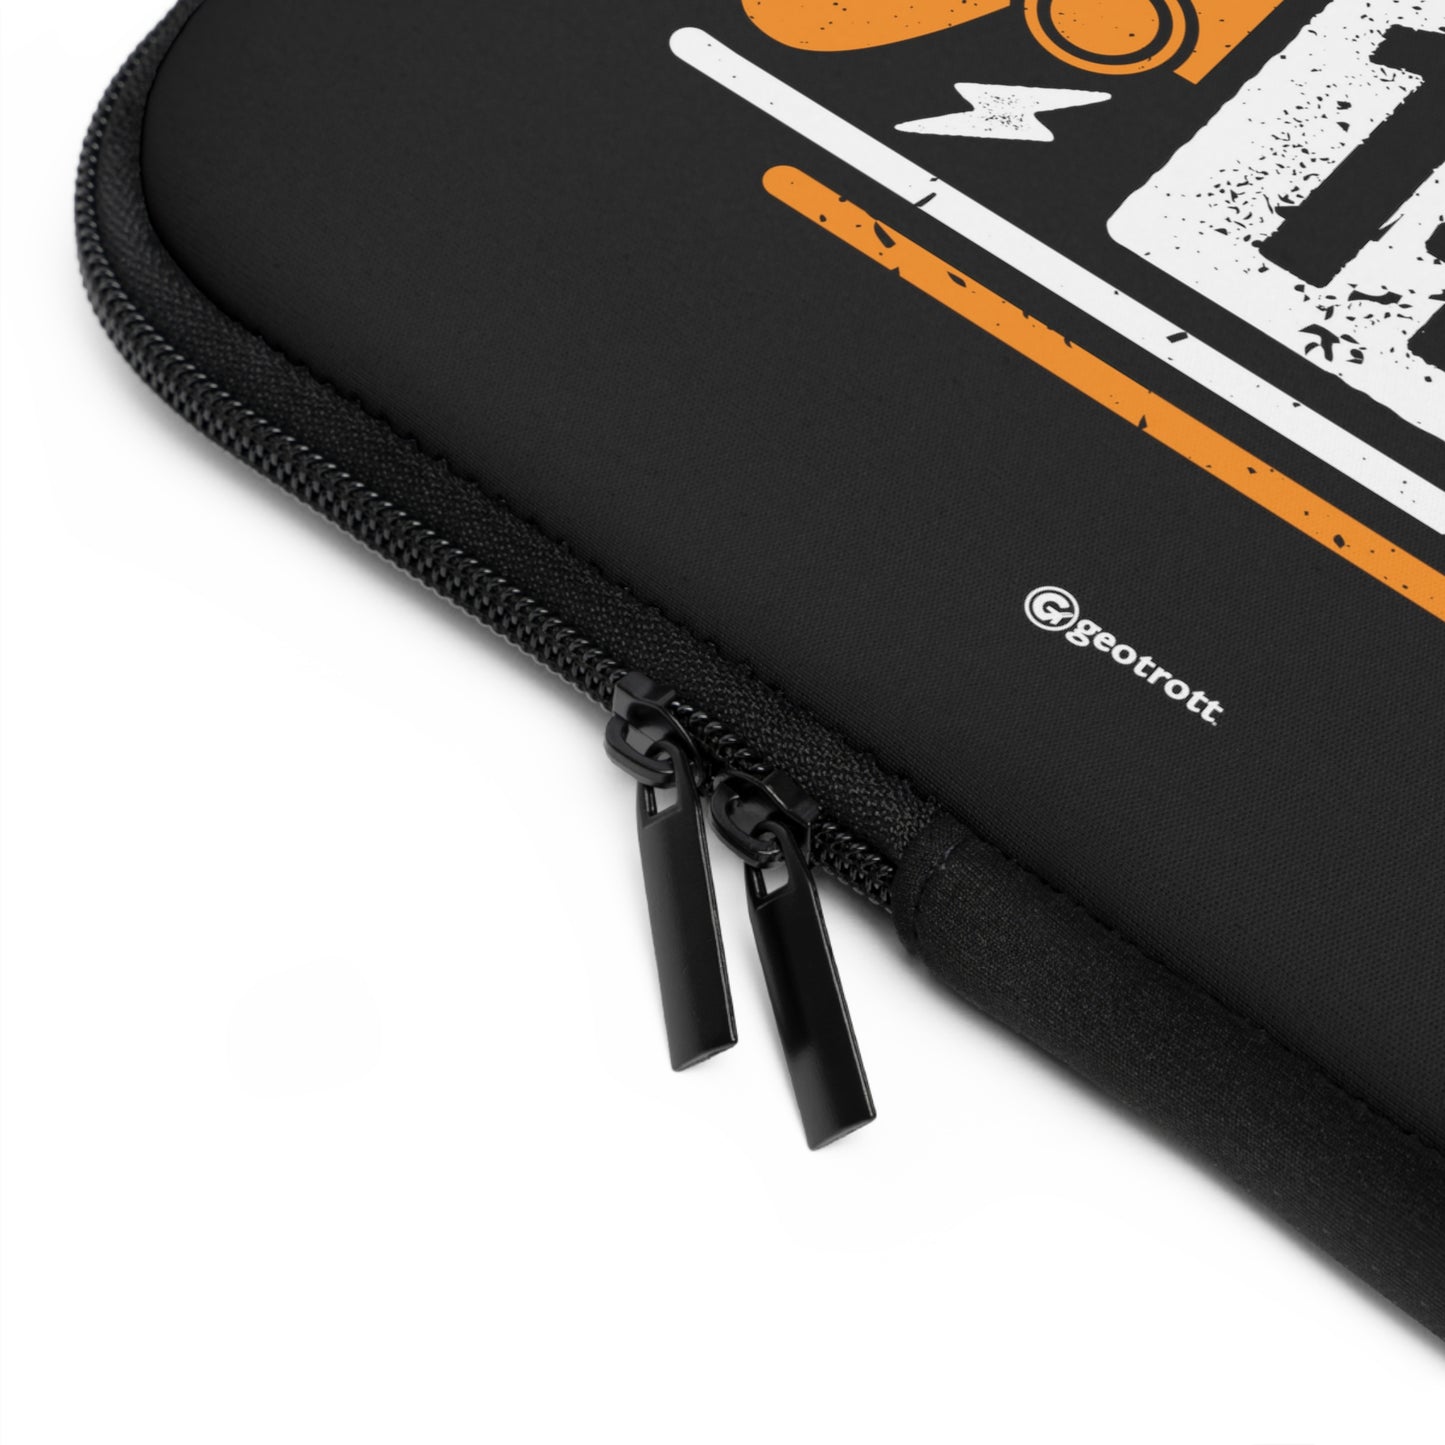 Be the Game Changer Number One Gamer Gaming Lightweight Smooth Neoprene Laptop Sleeve